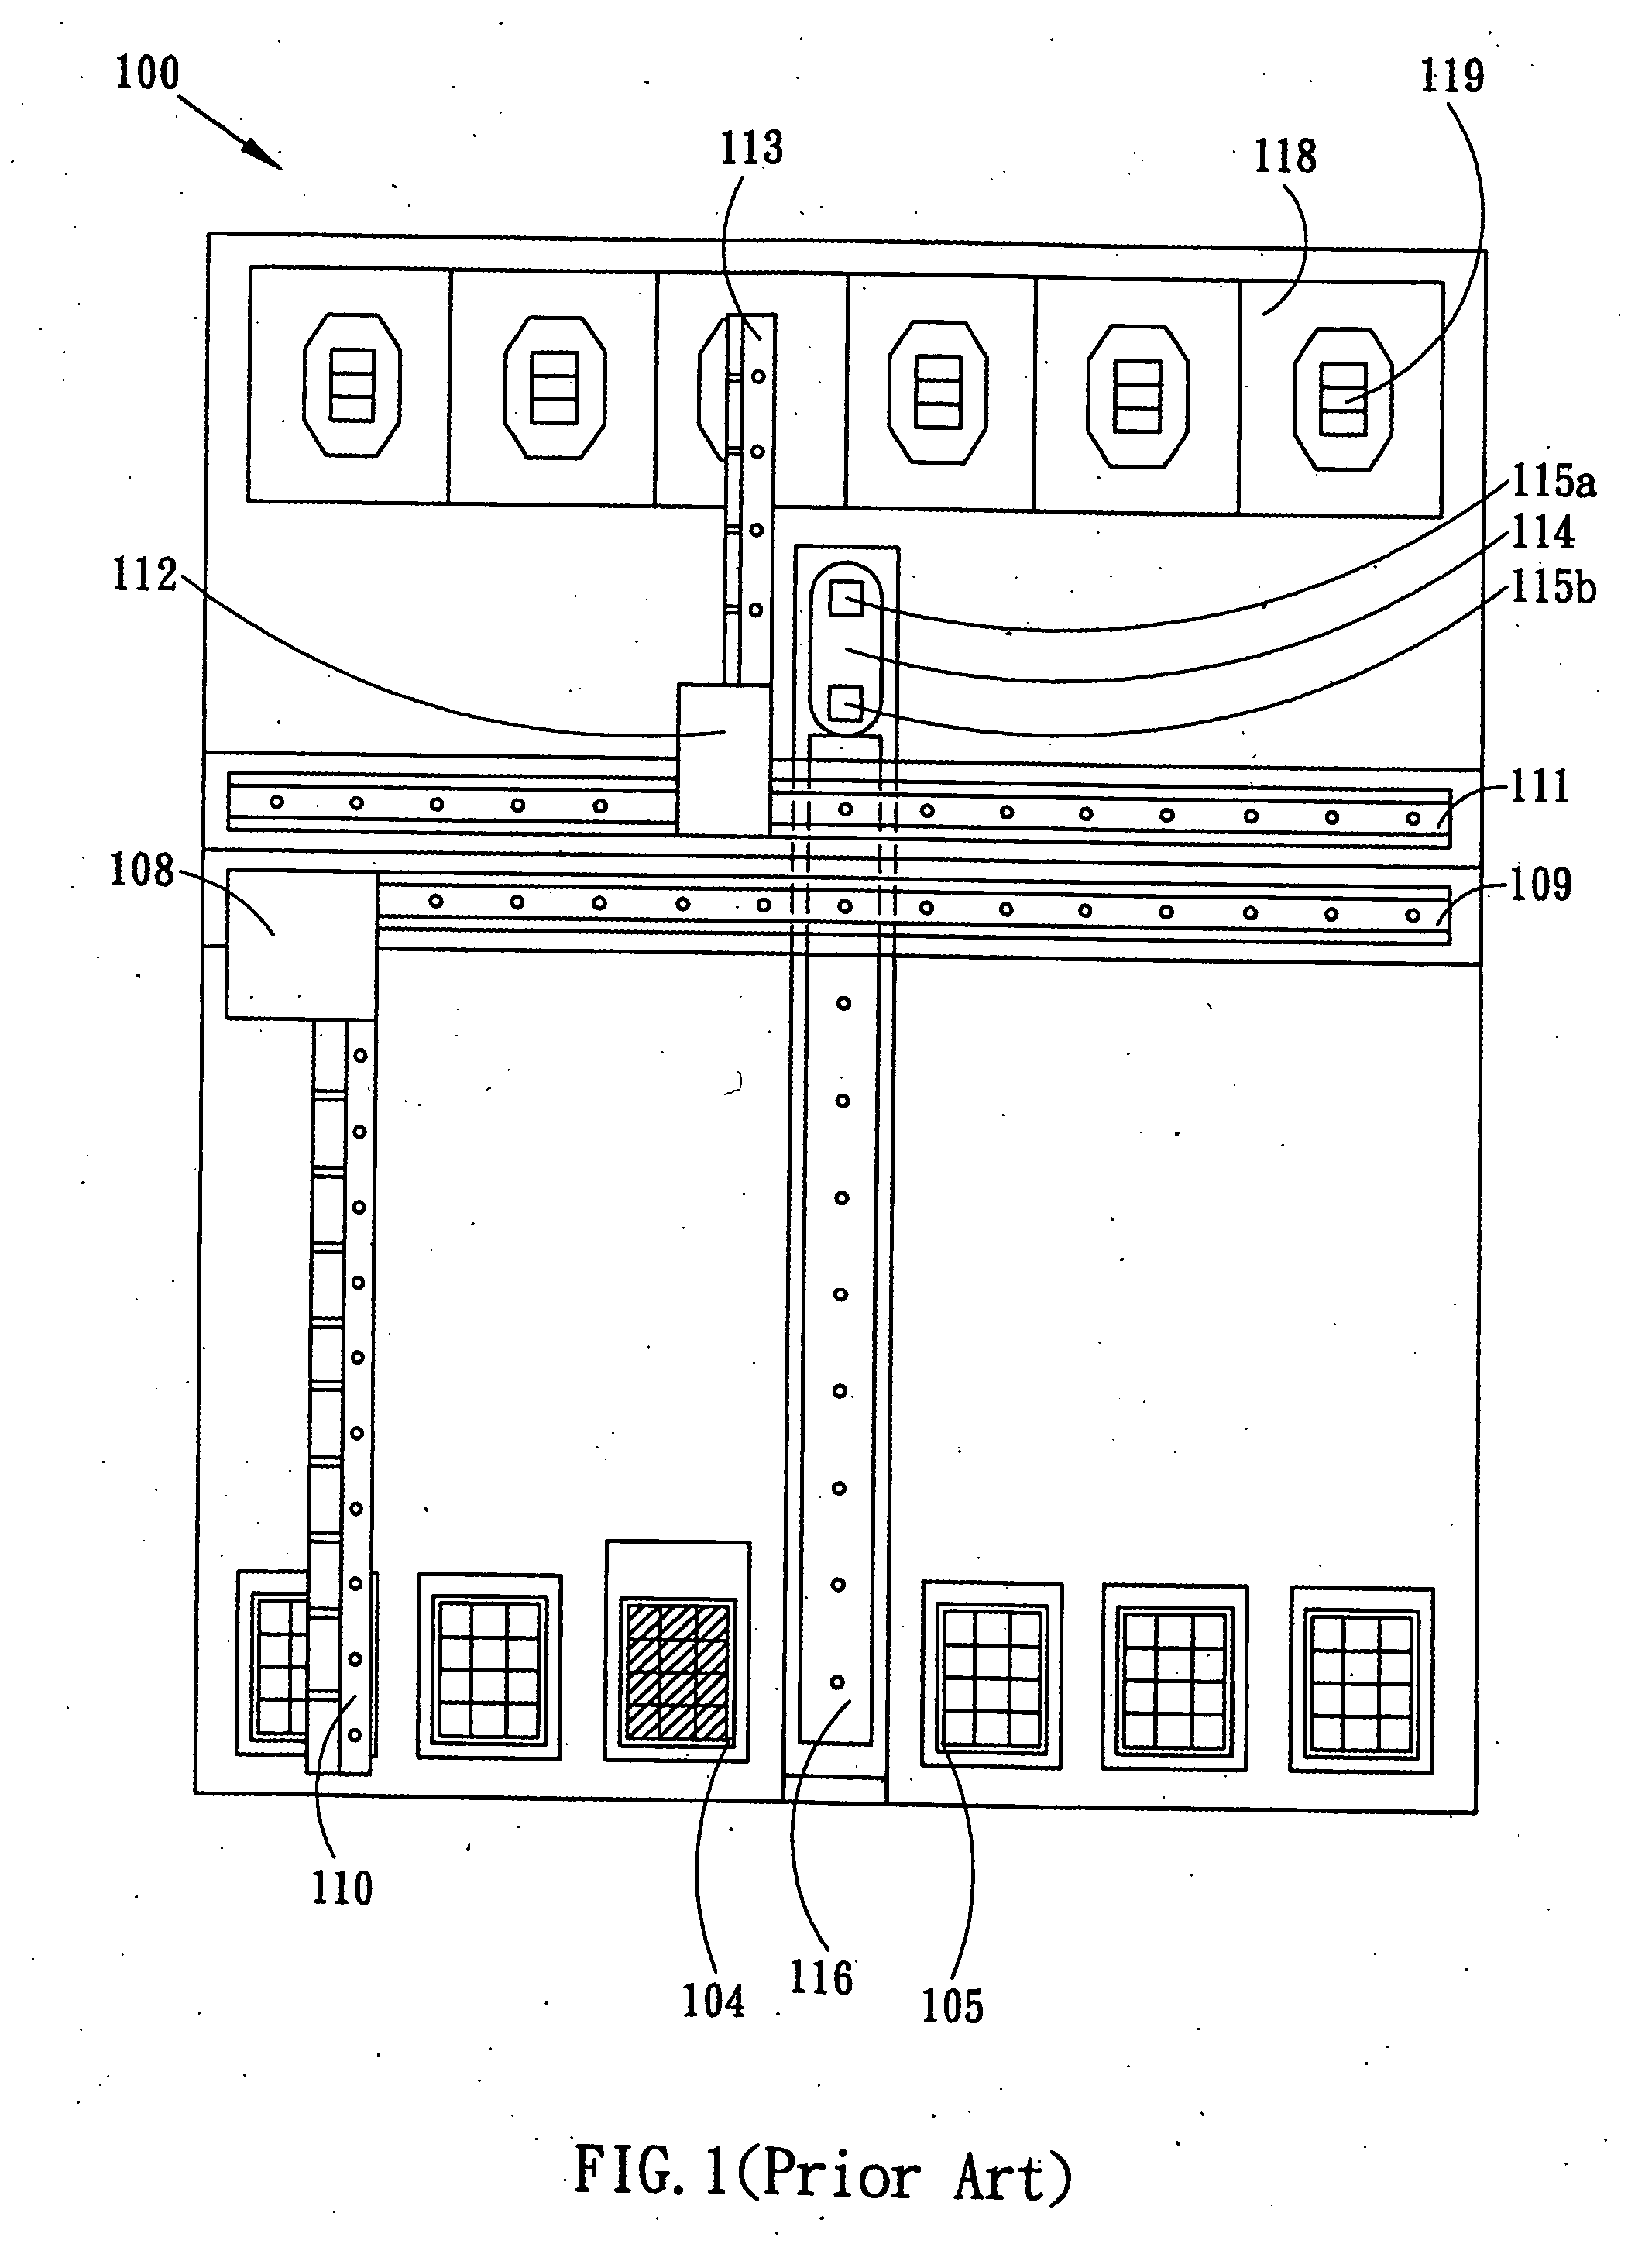 Electronic component testing apparatus